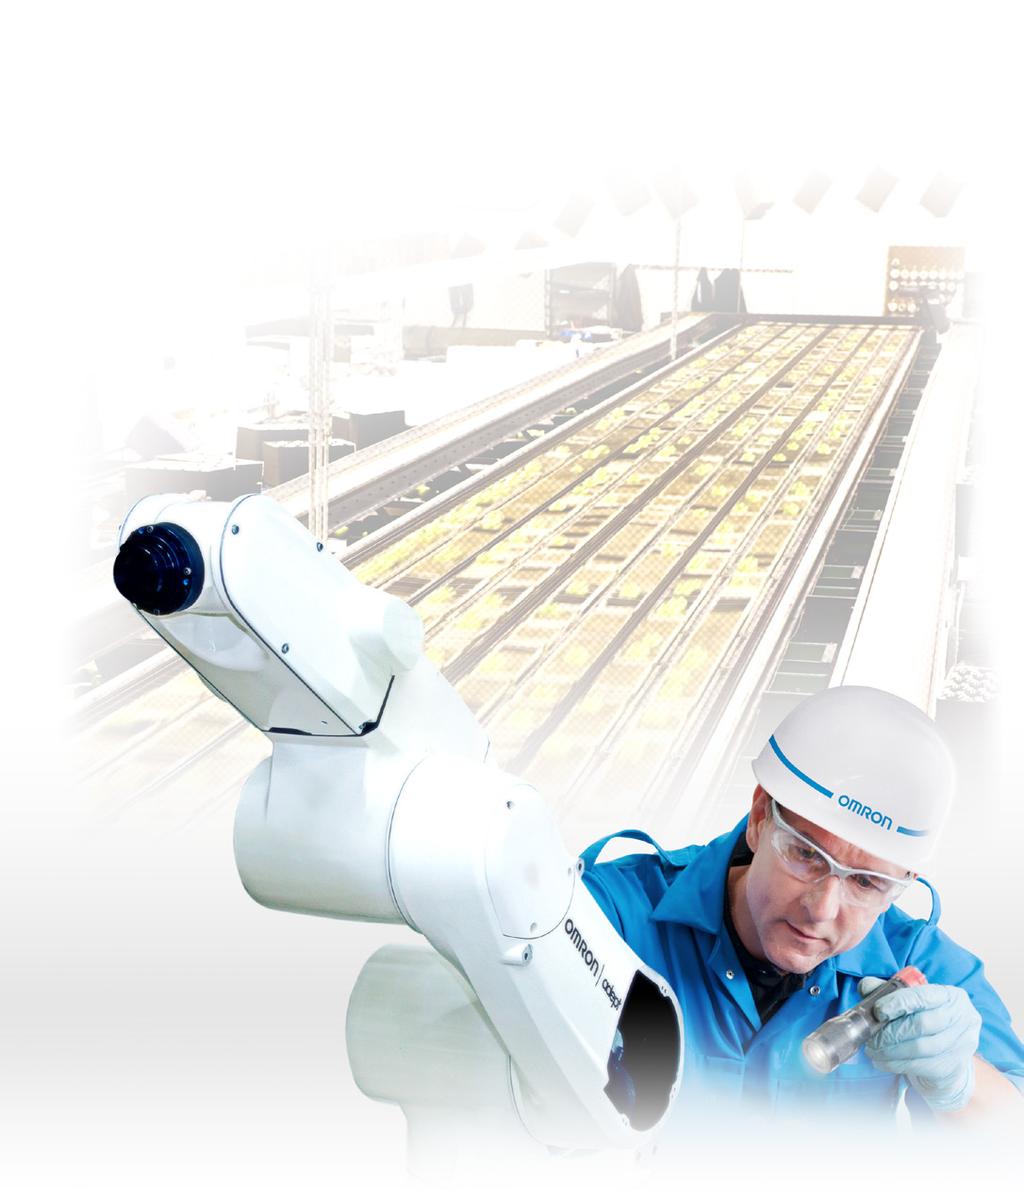 Robot Care Annual Maintenance Agreement for Ensuring the Uptime of the Equipment Expert service